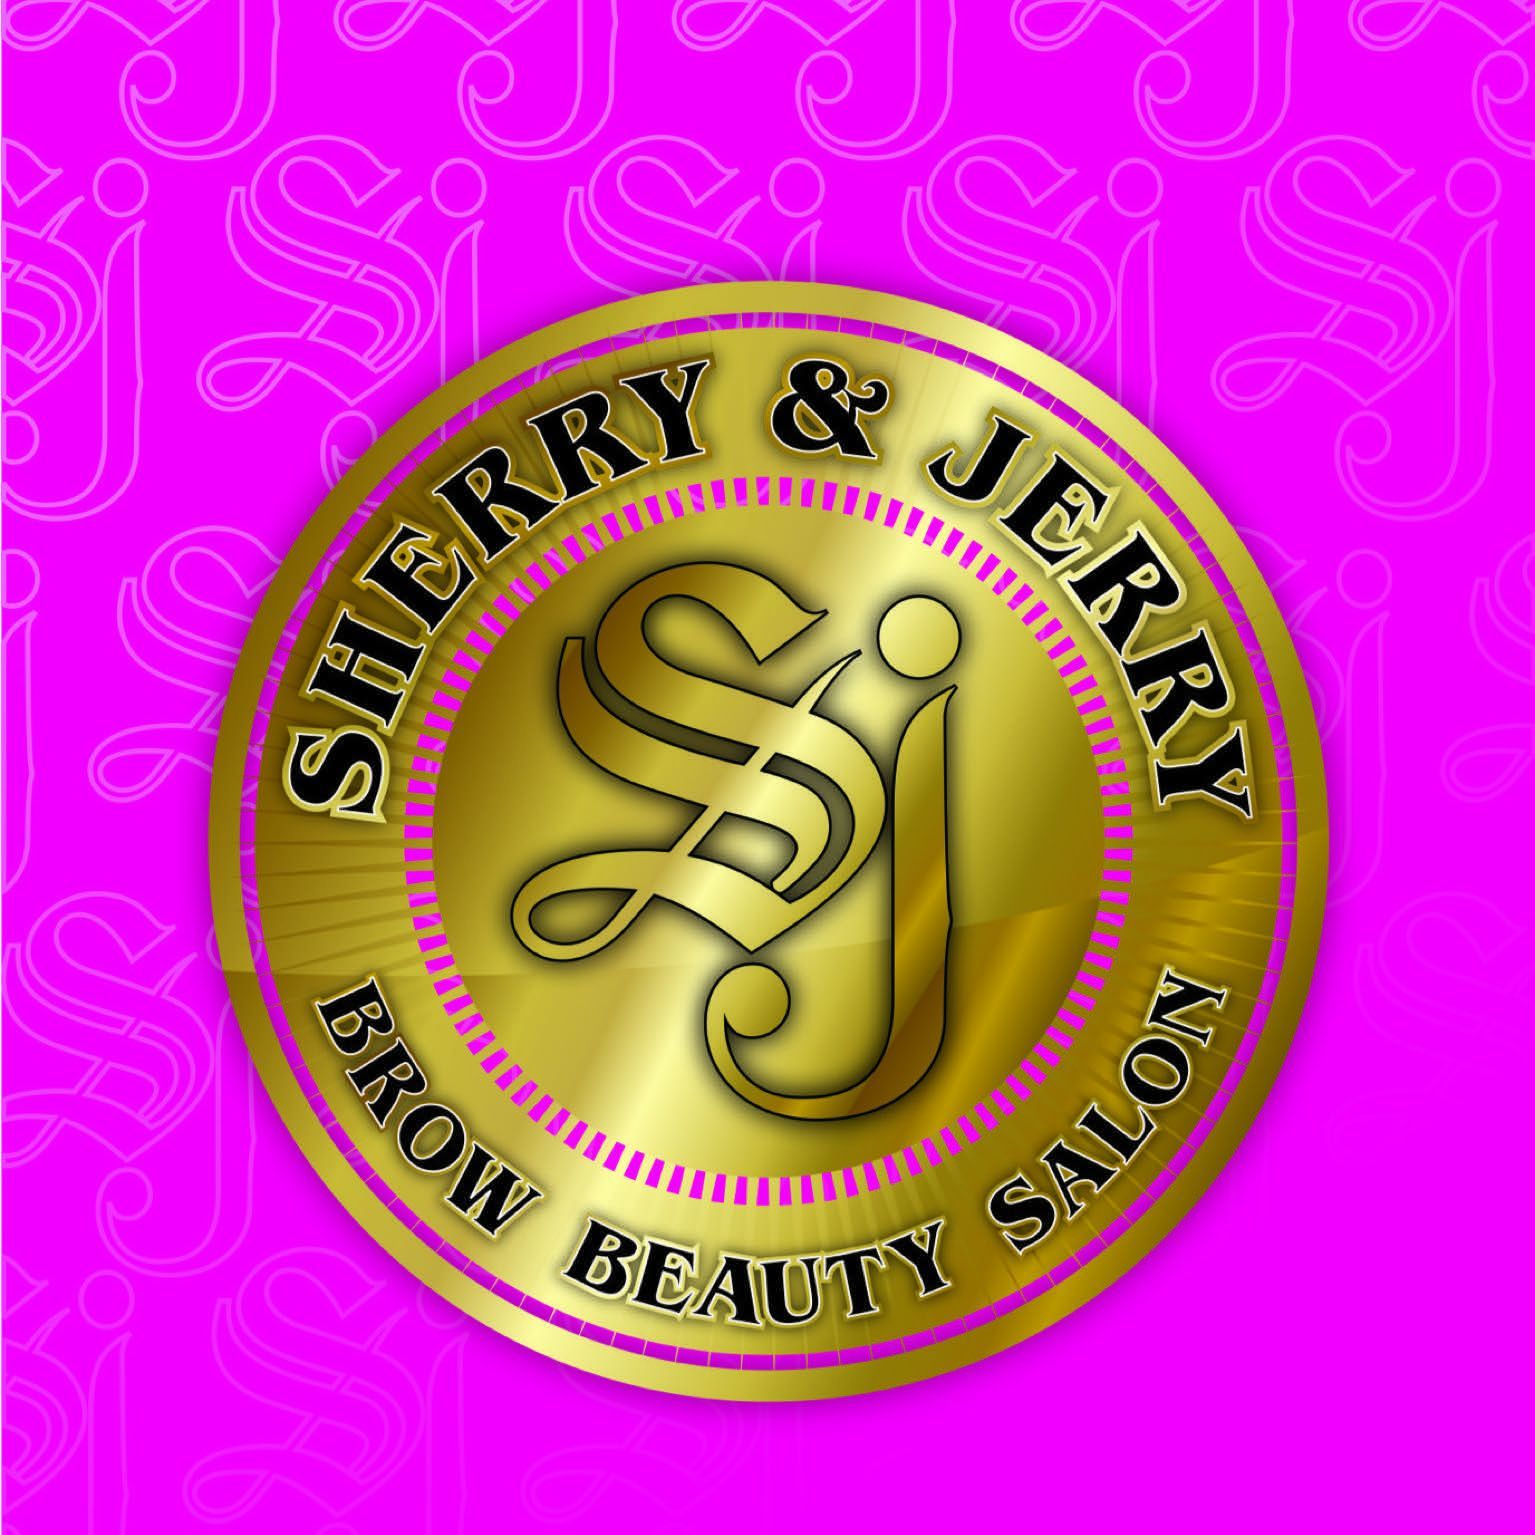 Sherry & Jerry Brow Beauty Salon, 10011 Pines Blvd, Suite.101 , Next to Allstate, Pembroke Pines, 33024